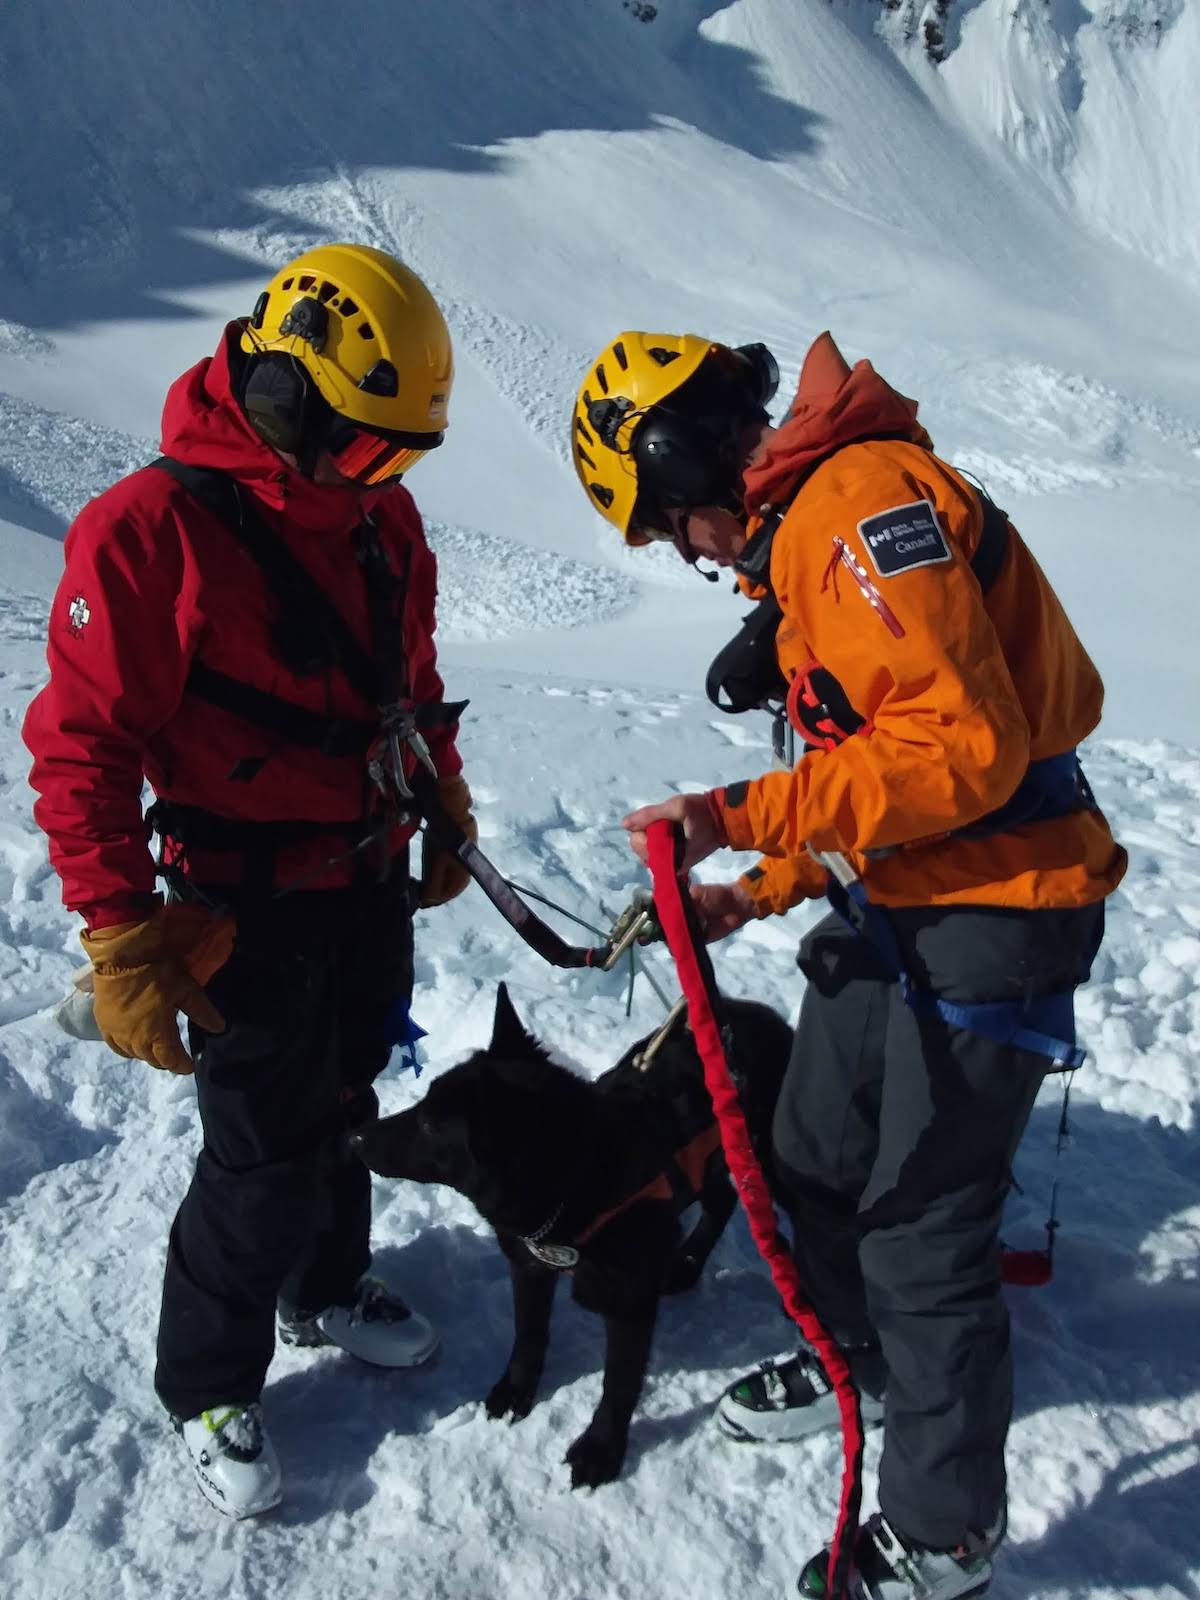 The search dog with handlers. [Photo] Courtesy of Parks Canada